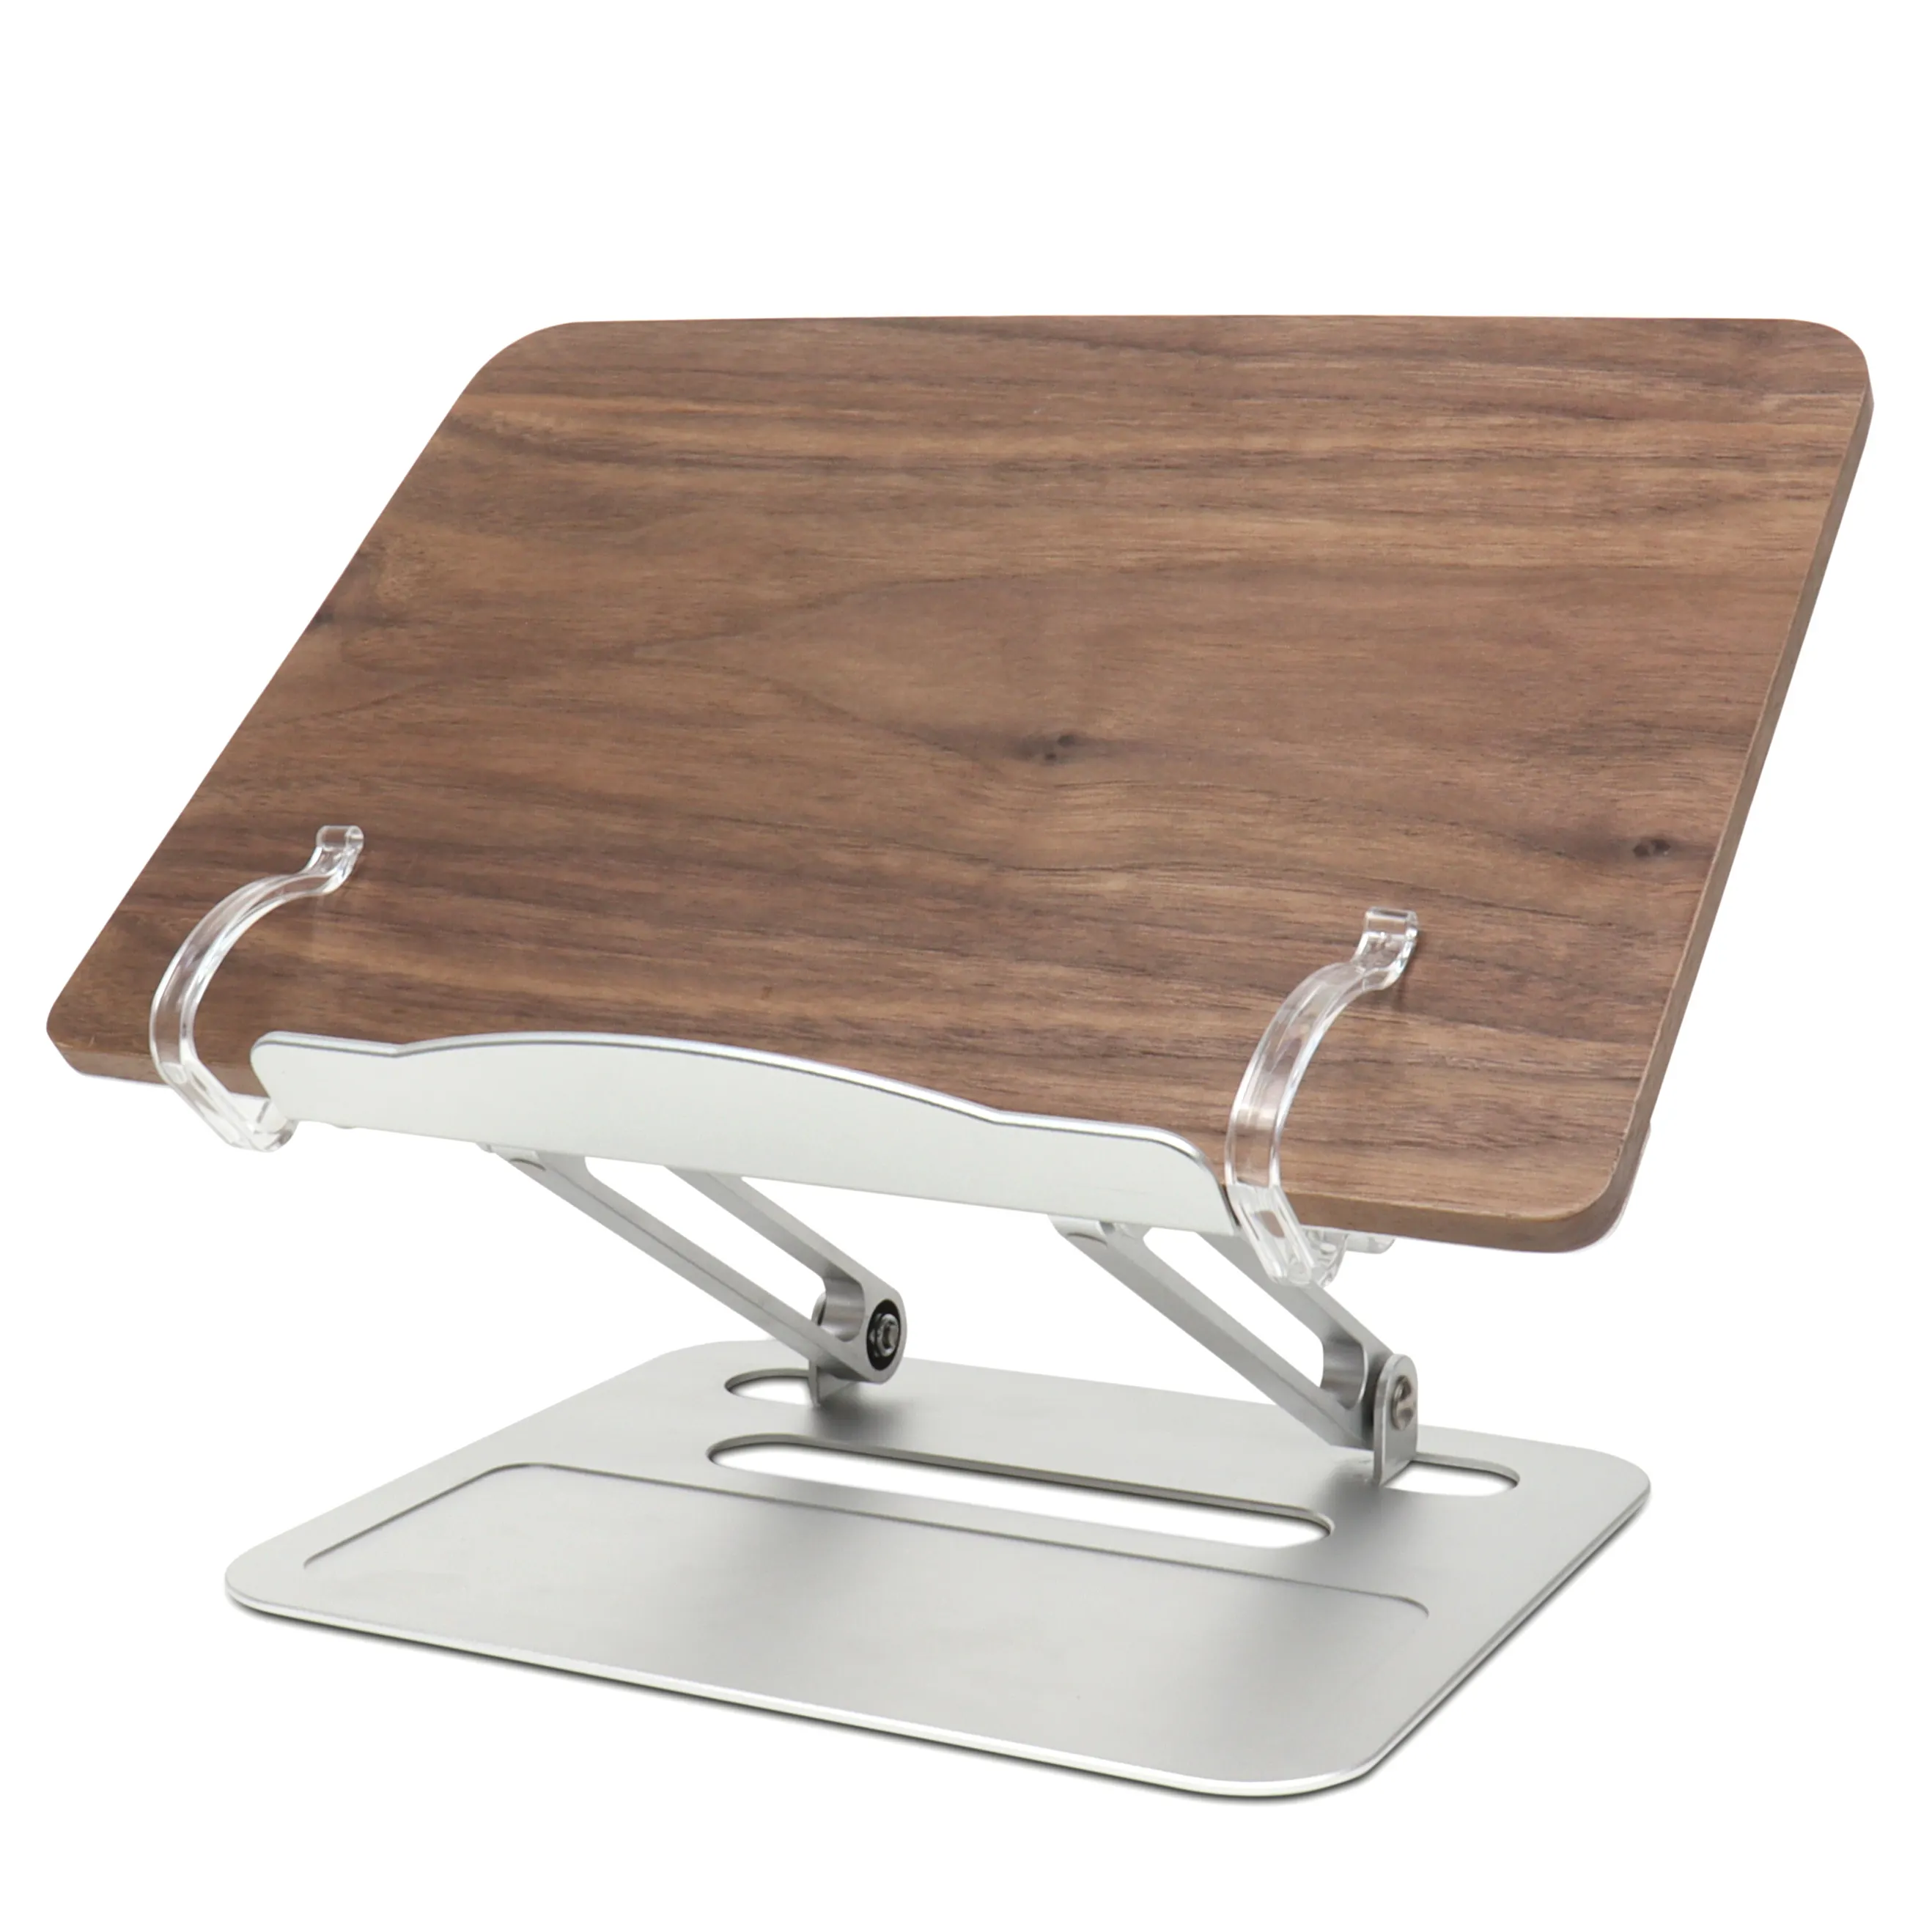 High quality walnut eco-friendly reading stand Recipe stand for table top adjustable